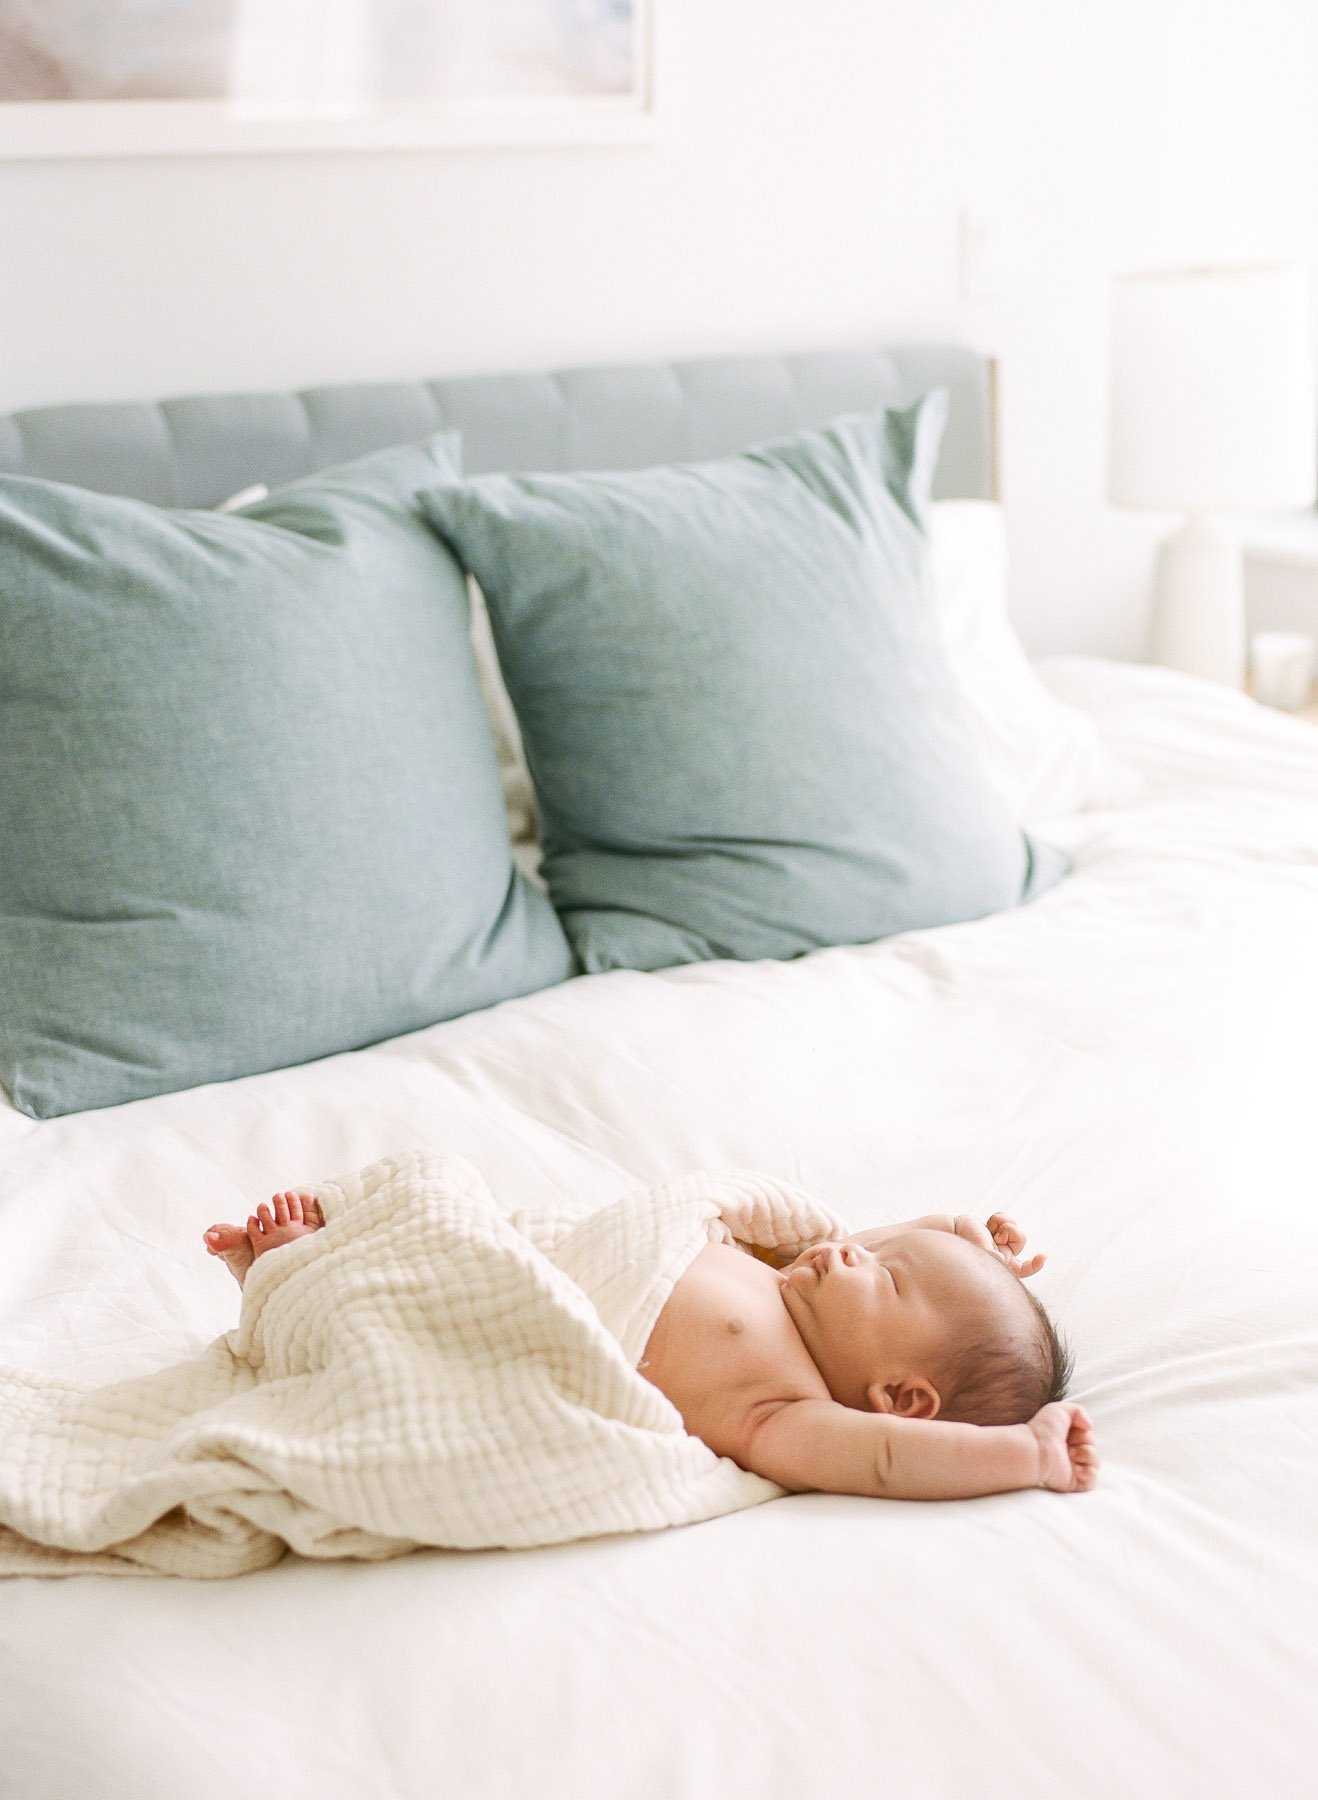 NYC Newborn Photography by Michelle Lange Photography-48.jpg